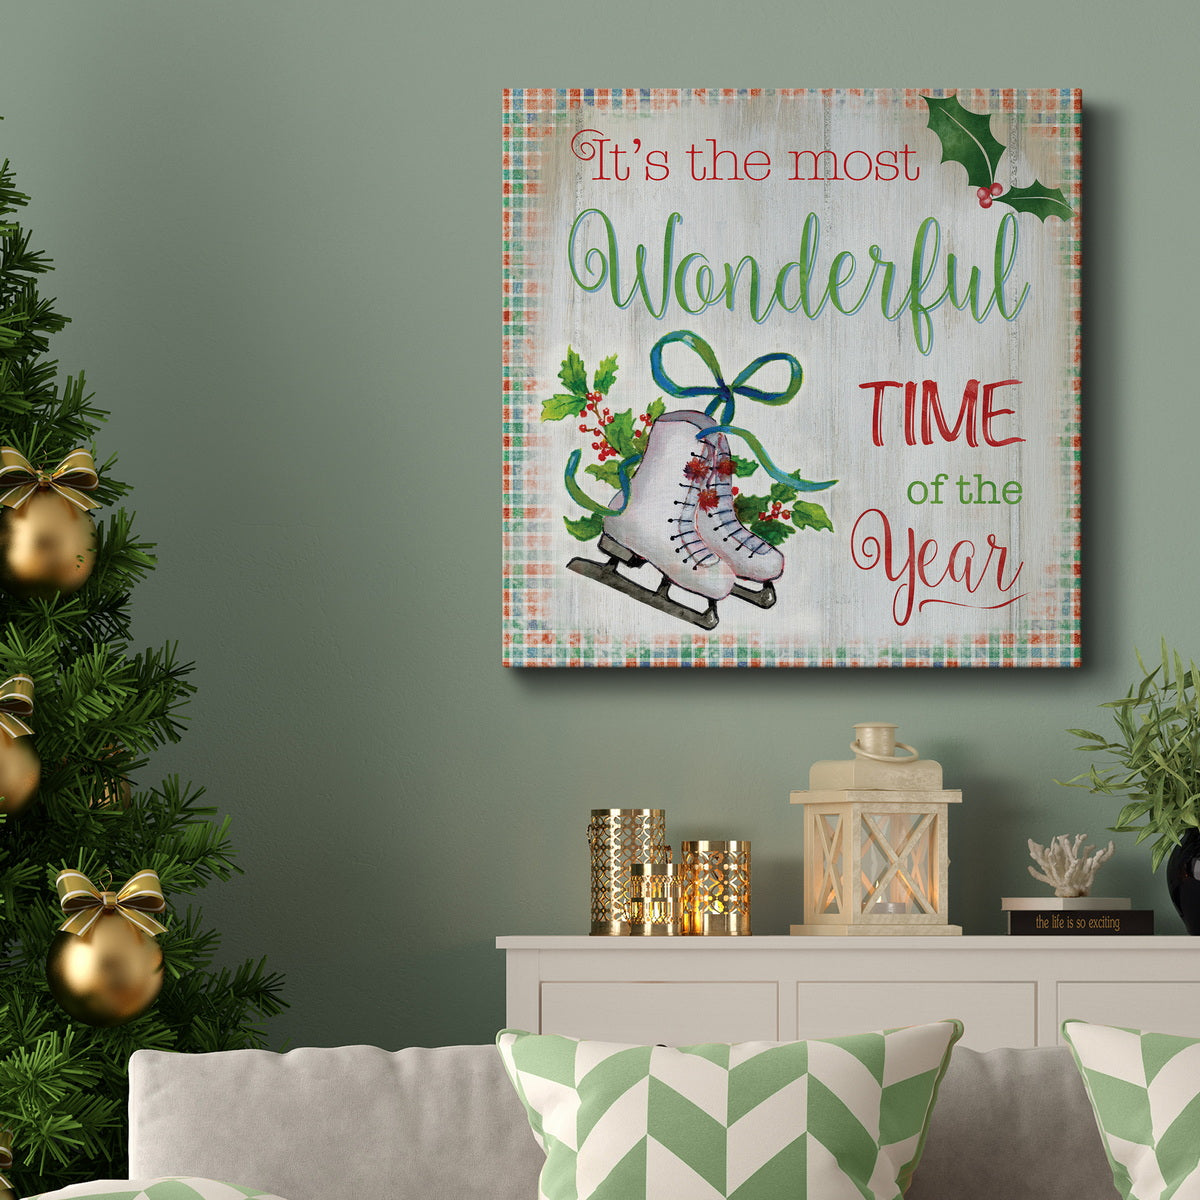 Wonderful Time-Premium Gallery Wrapped Canvas - Ready to Hang